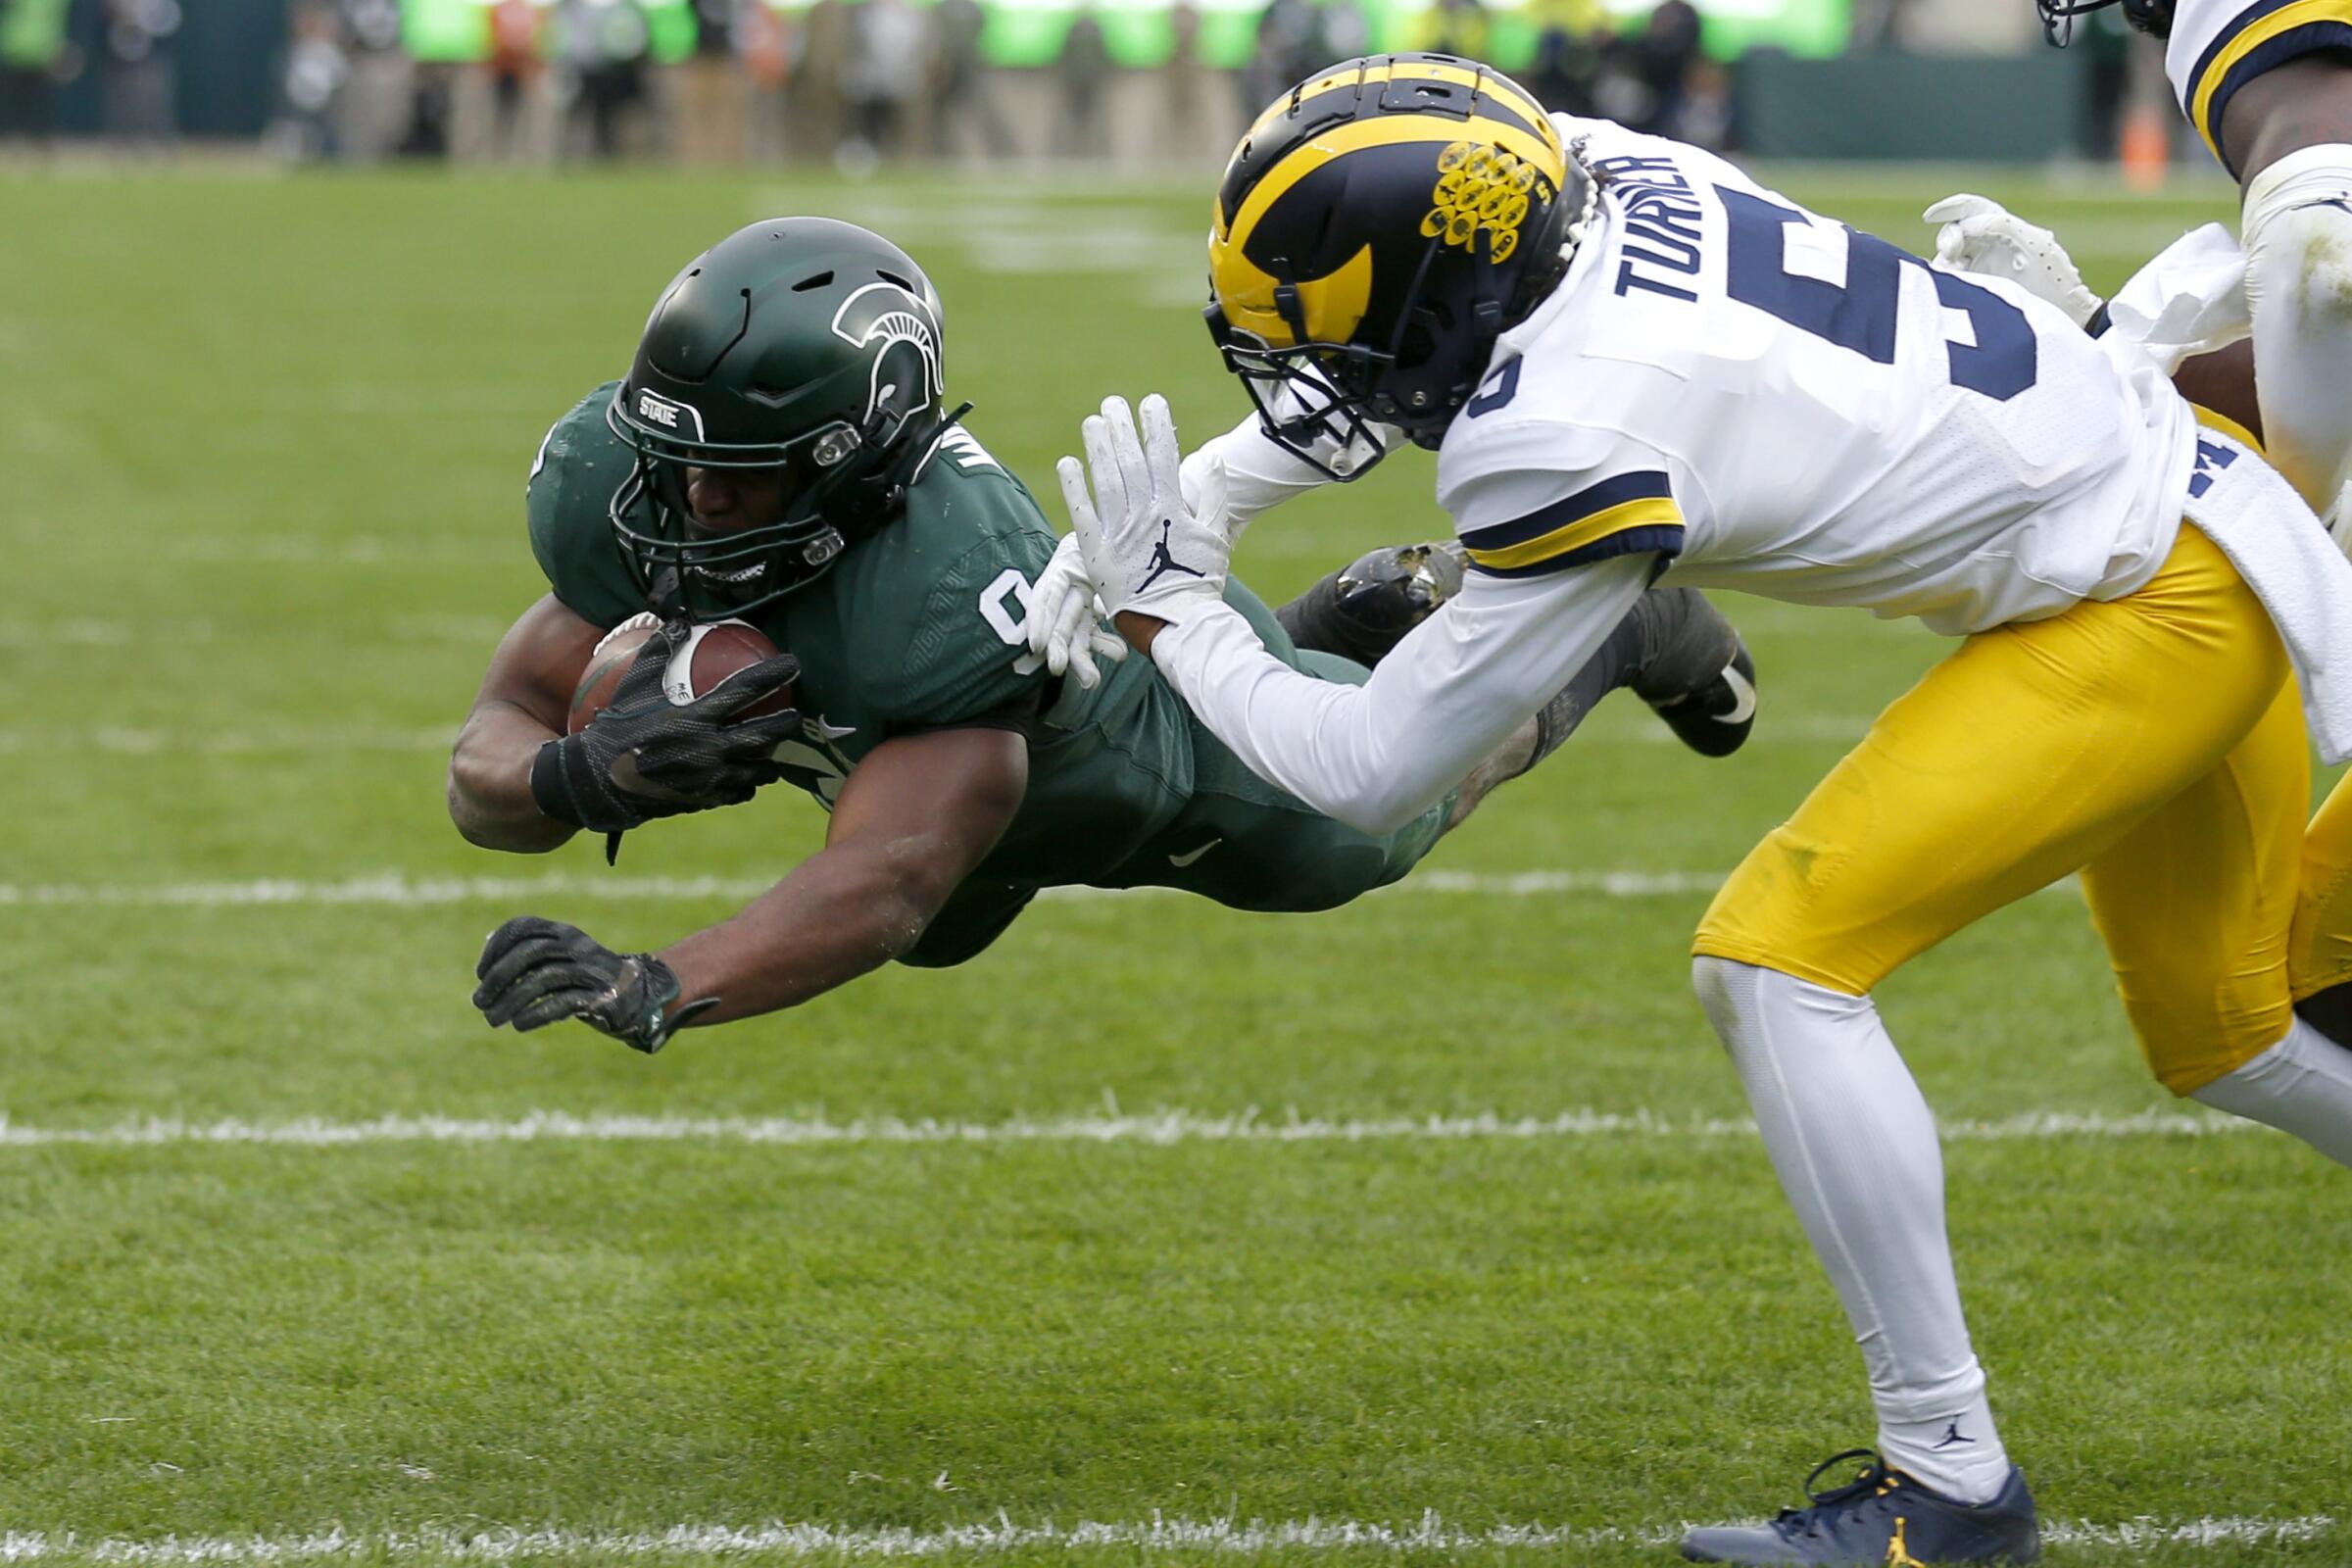 Michigan State running back Kenneth Walker dives over the goal line for a touchdown in front of Michigan's DJ Turner.